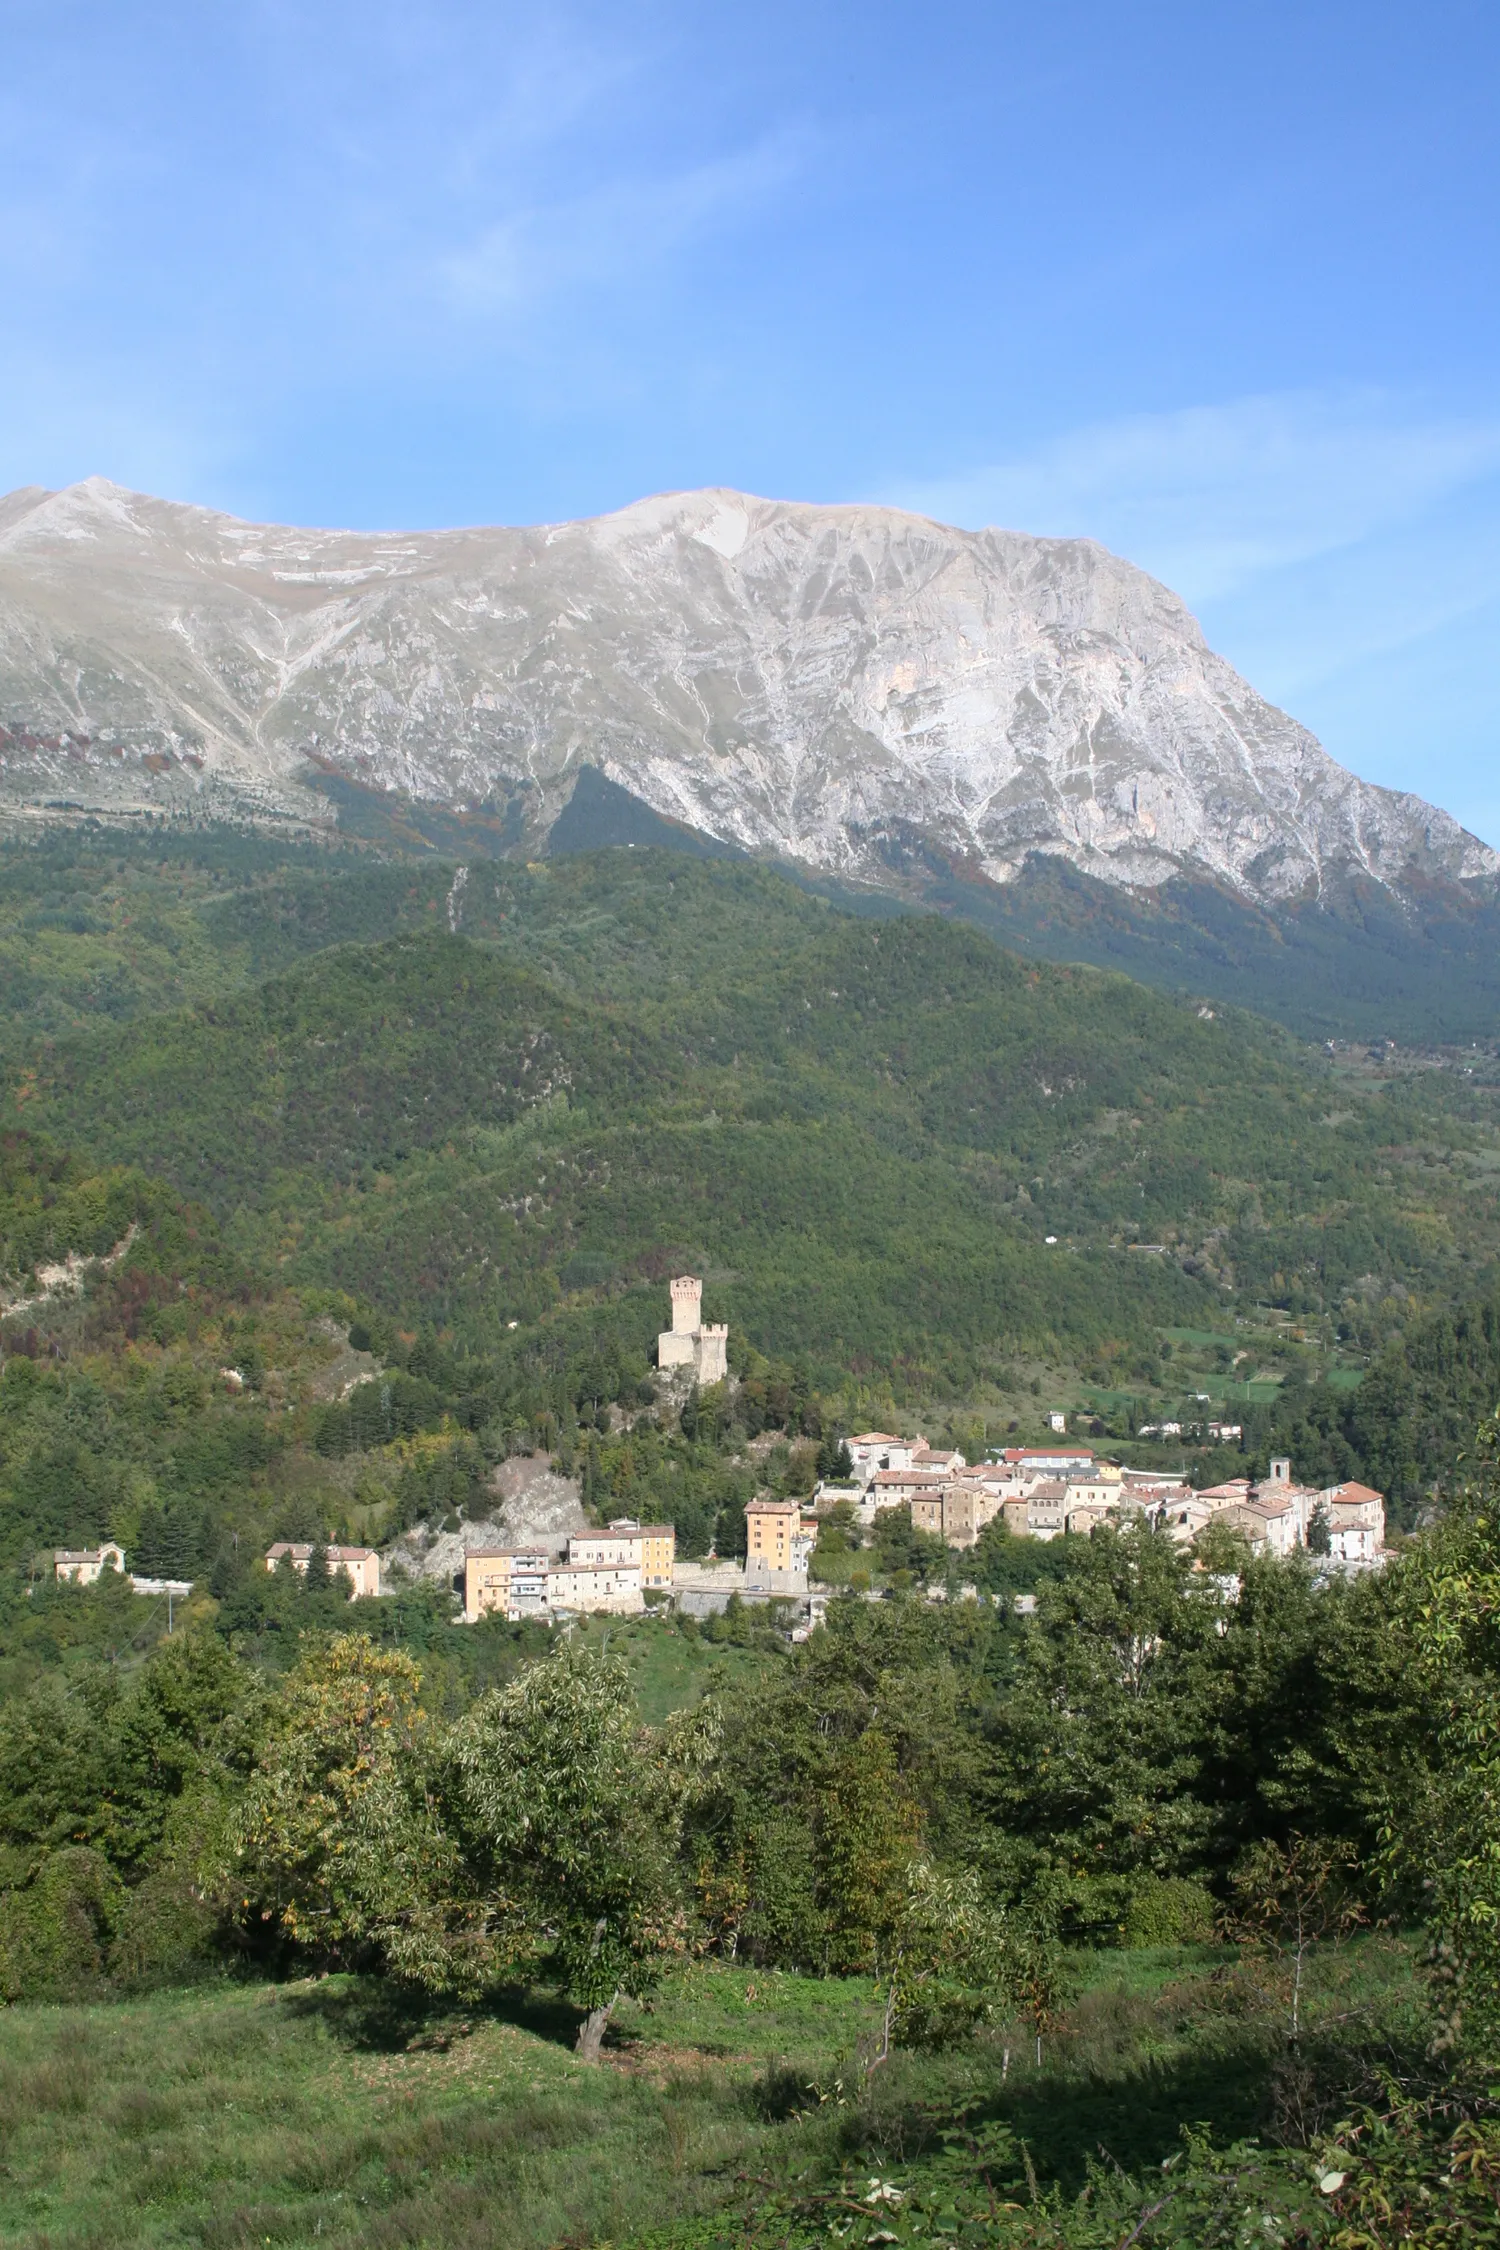 Photo showing: One peak (?) of the mountains Monte Vettore in Italy, seen from Arquata del Tronto in Valle del Tronto.